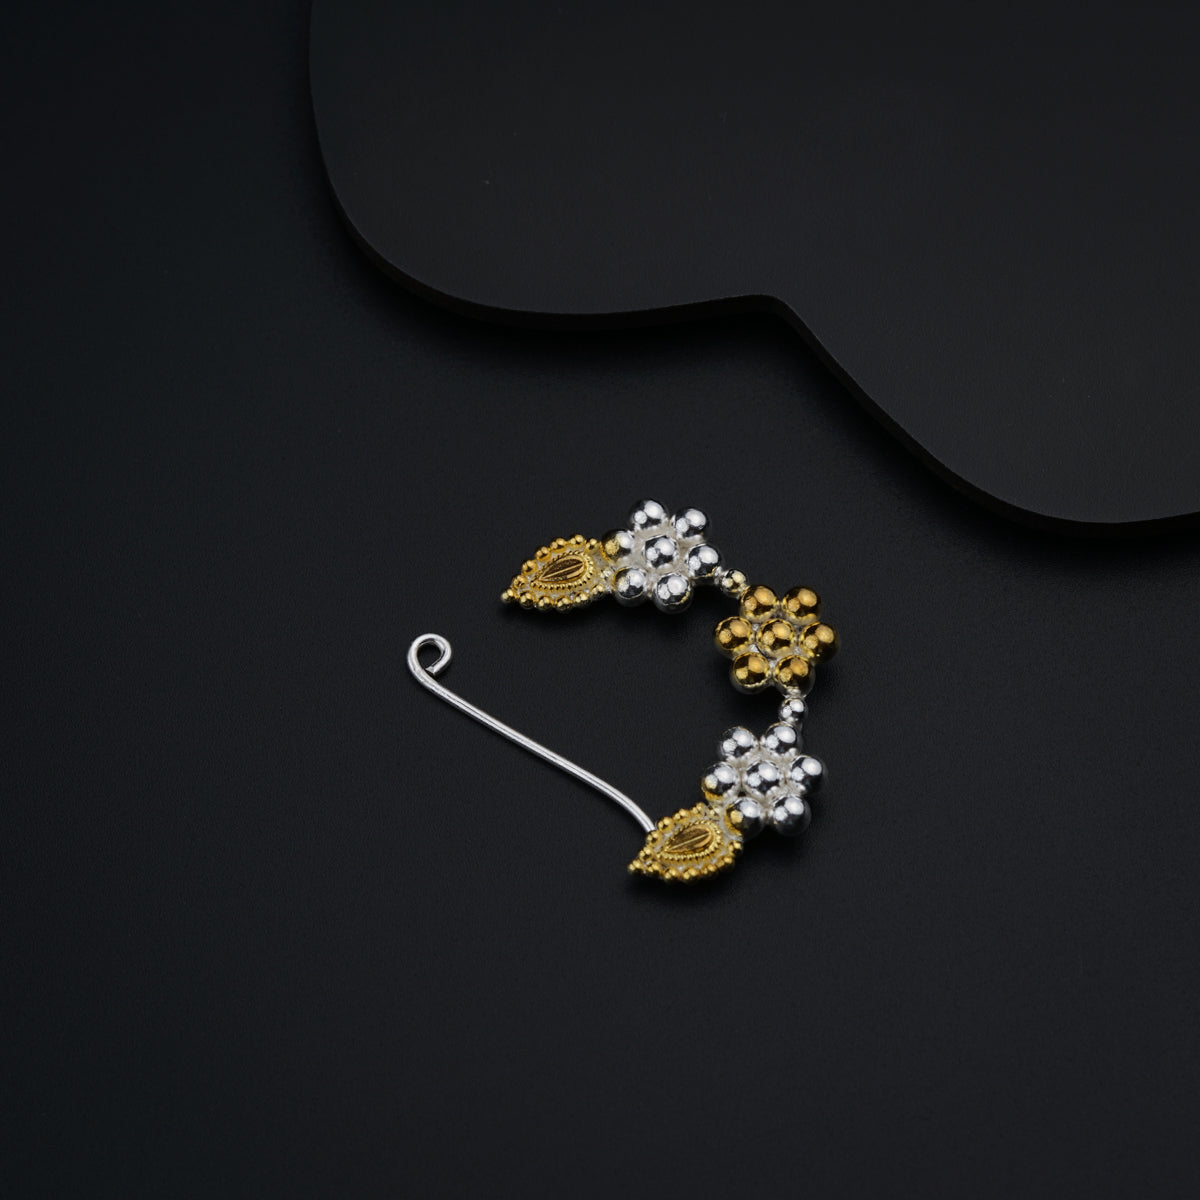 a pair of gold and white earrings on a black background